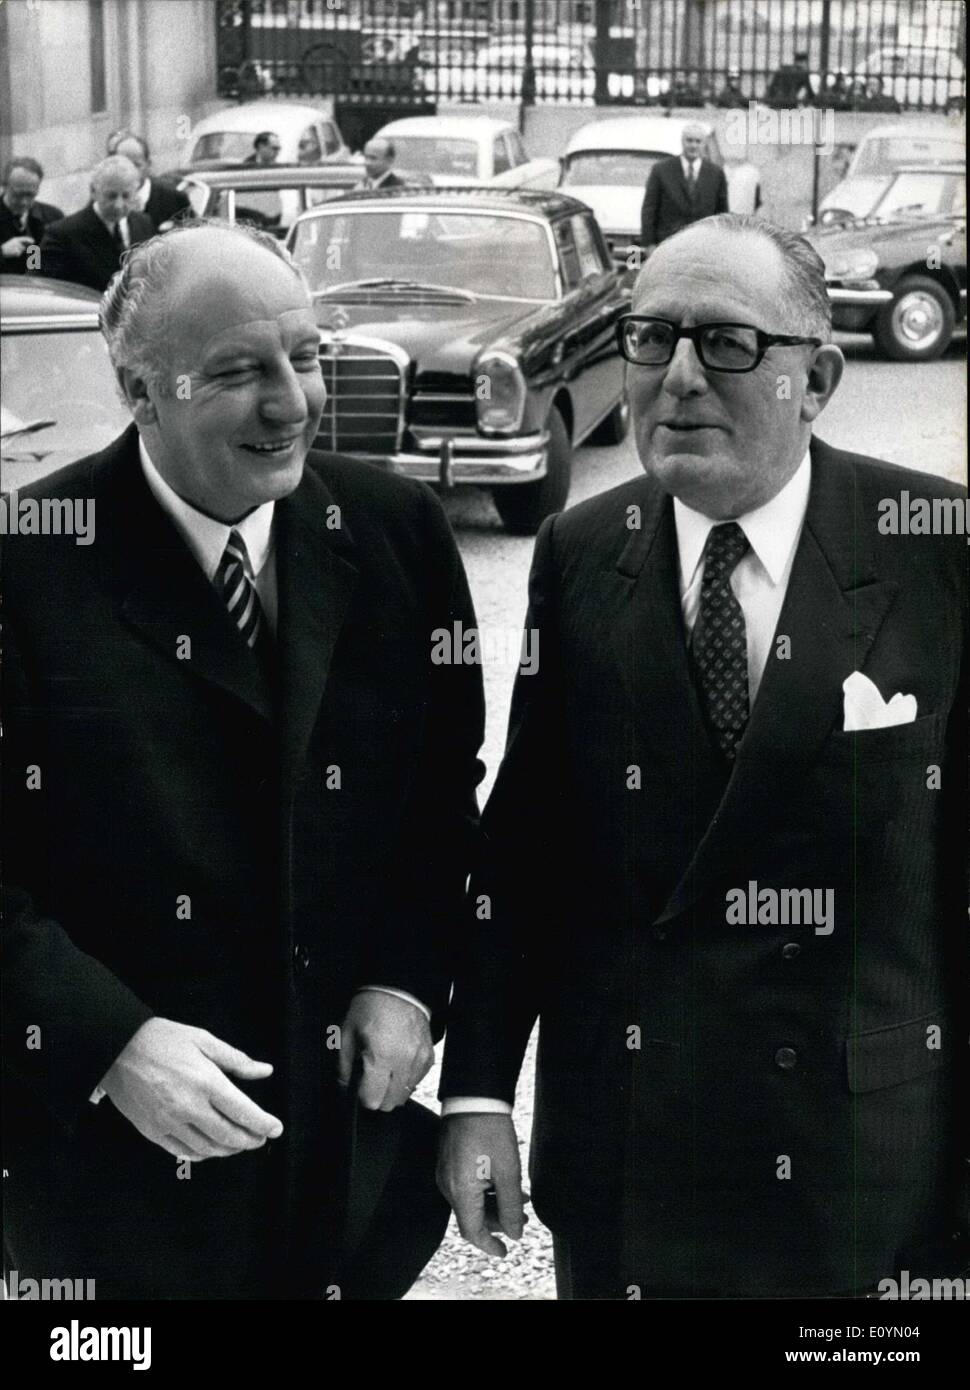 Nov. 02, 1970 - Mr. Scheel and Germany's Minister of Foreign Affairs, who continue their conversations about Berlin, were received in Paris today by Mr. Maurice Schumann, France's Minister of Foreign Affairs. Picture: Mr. Walter Scheel (left) welcomed by Mr. Maurice Schumann upon his arrival to the Department of Foreign Affairs. Stock Photo